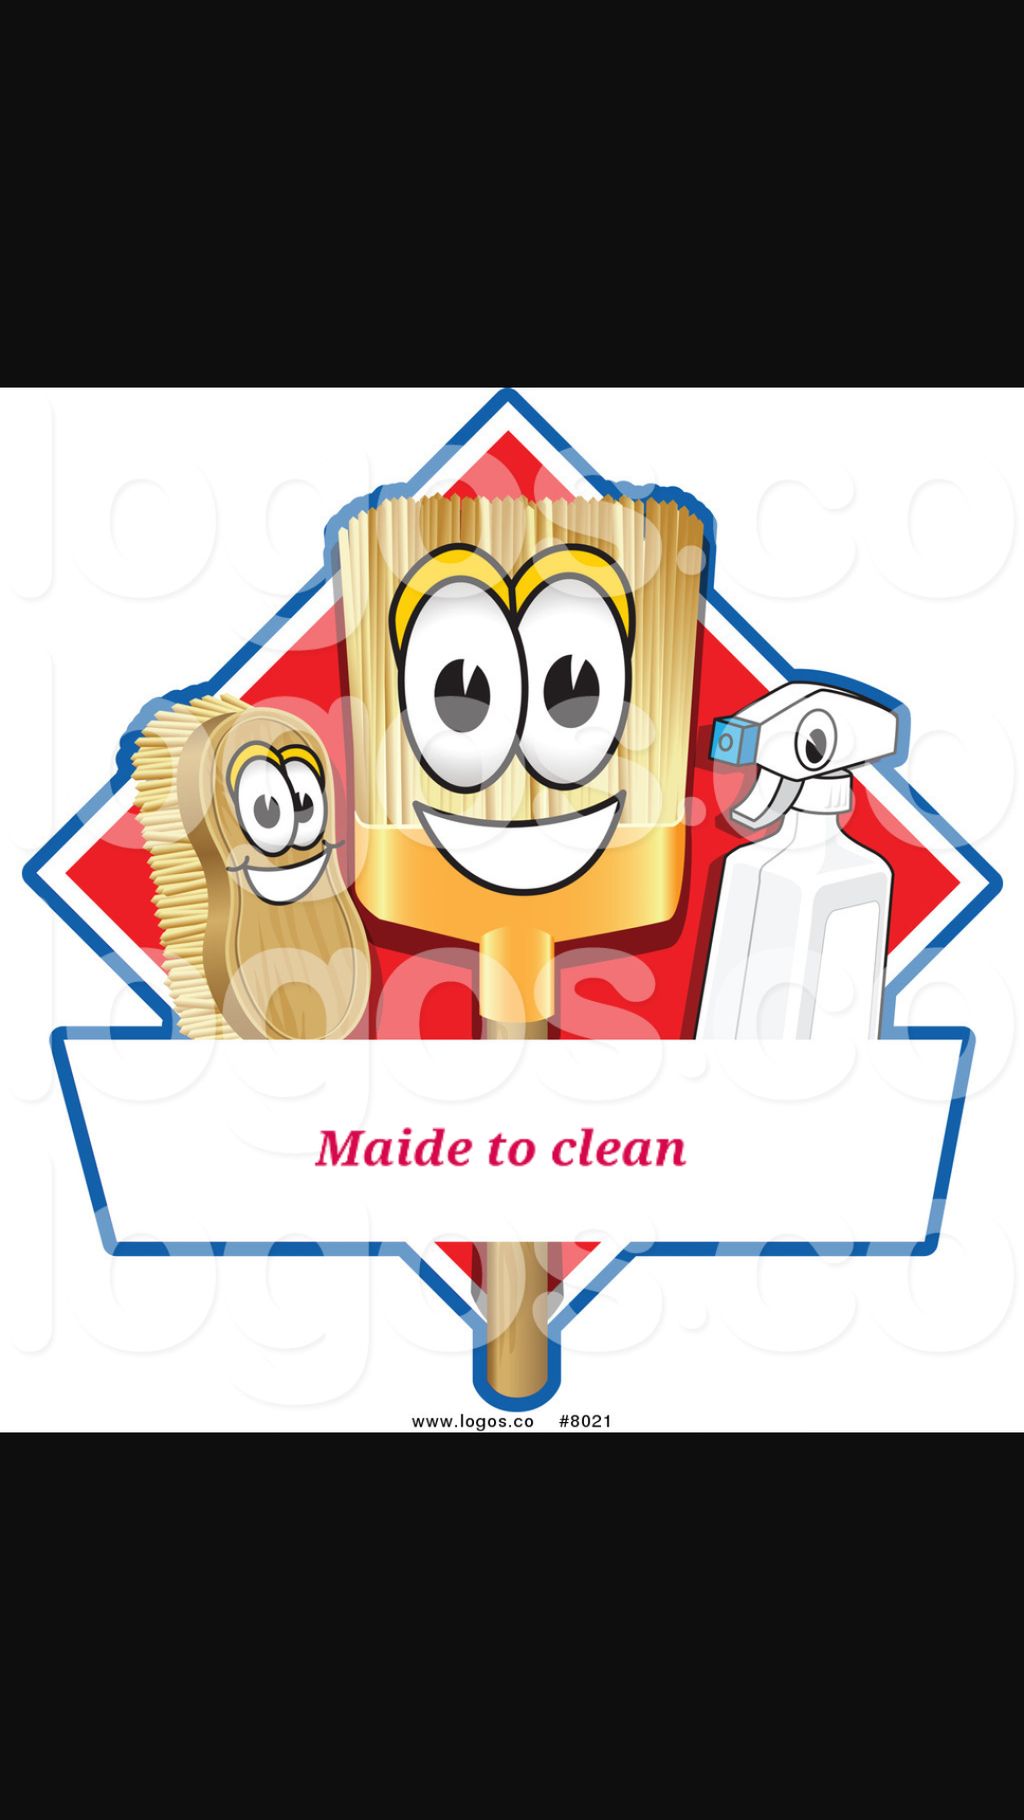 Maide to clean